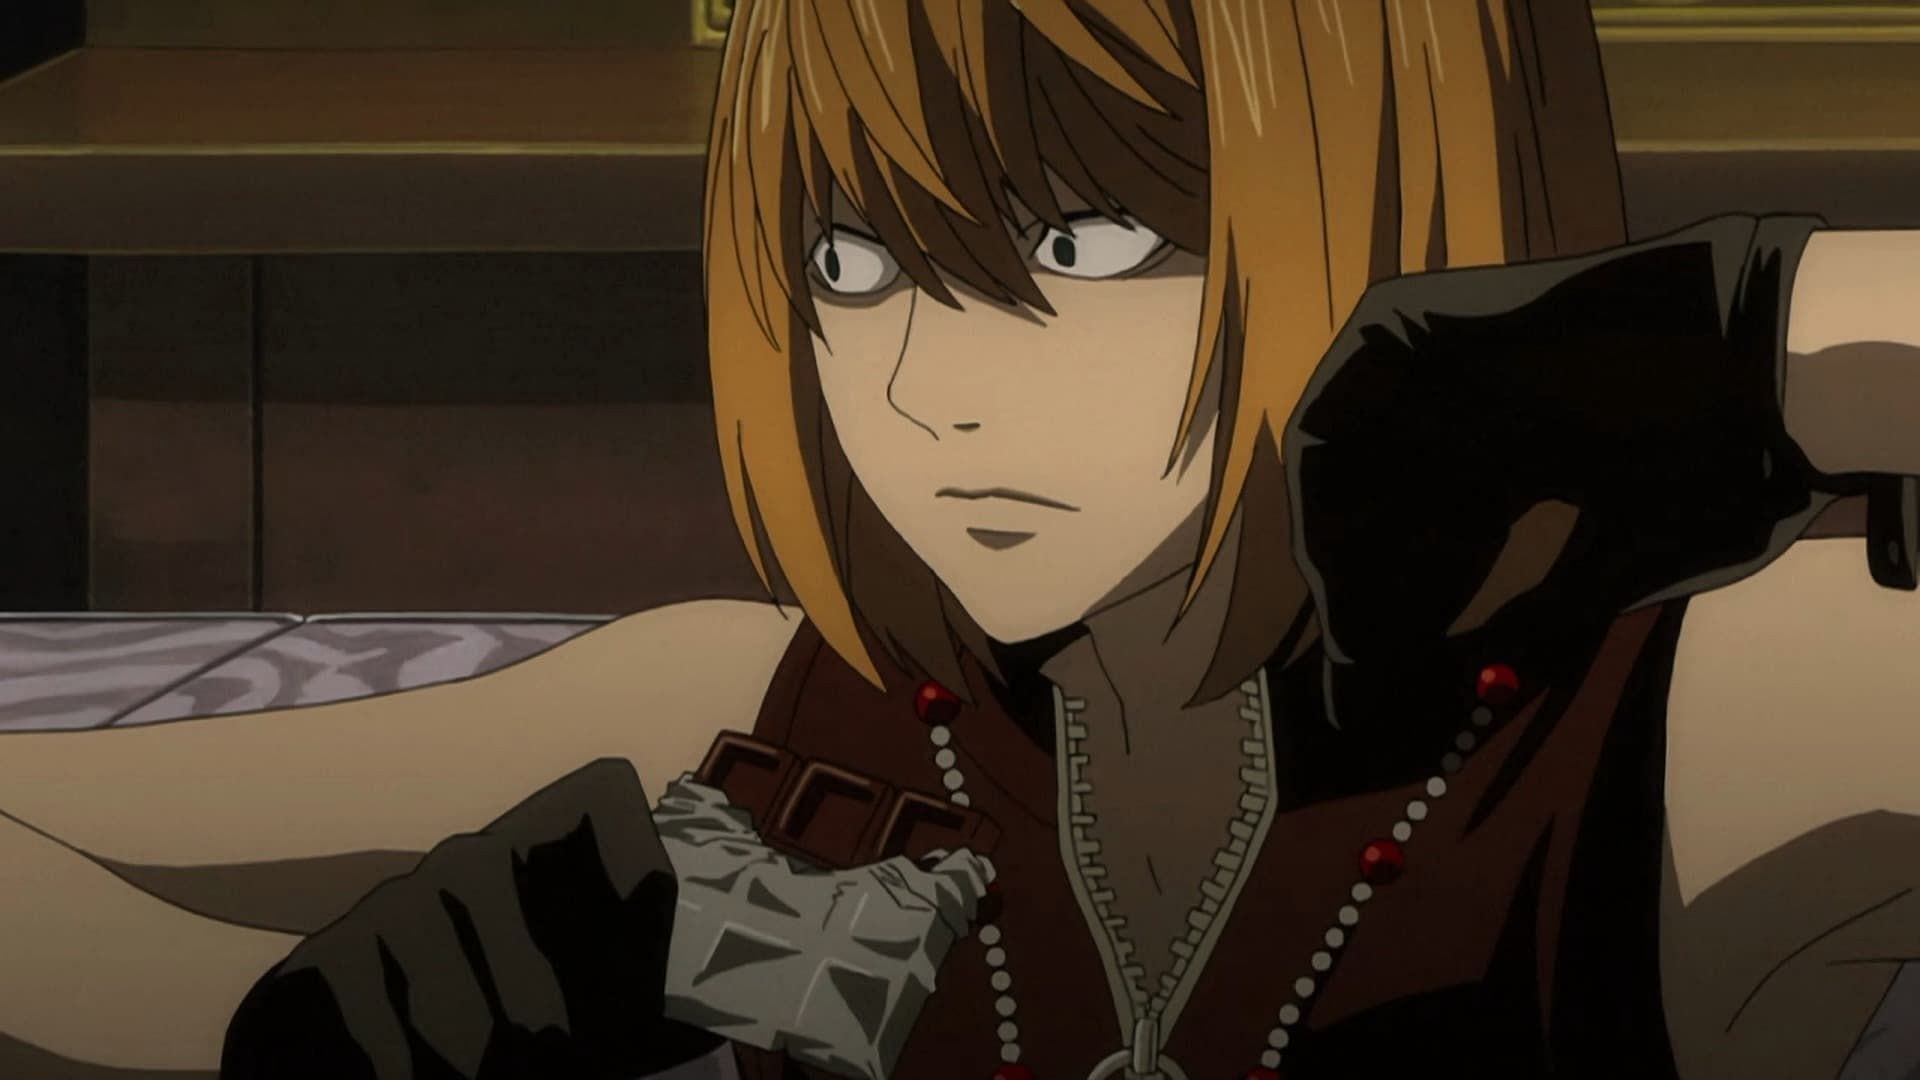 Mello would probably be a vigilante if he was a character in My Hero Academia (Image via Tsugumi Ohba, Death Note)